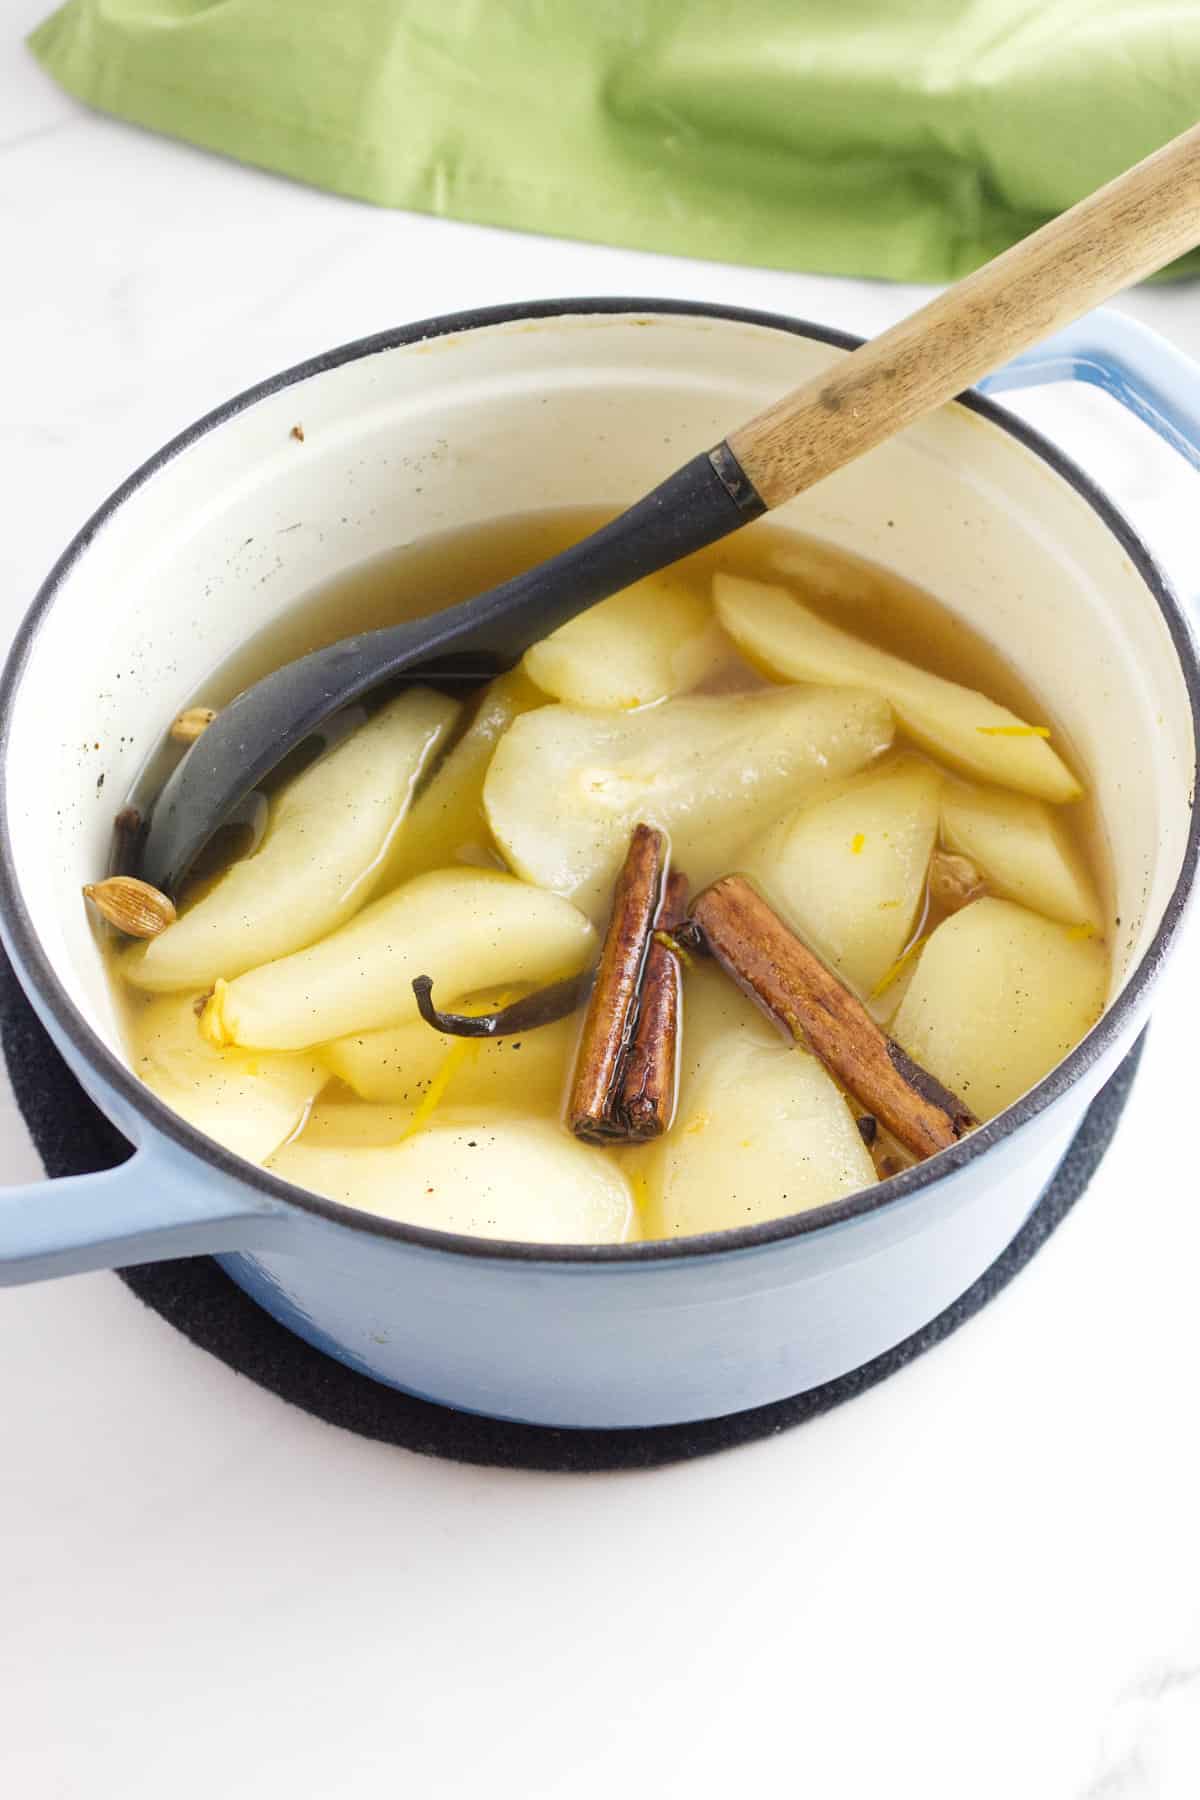 stewing quartered pears in a pot with spices.